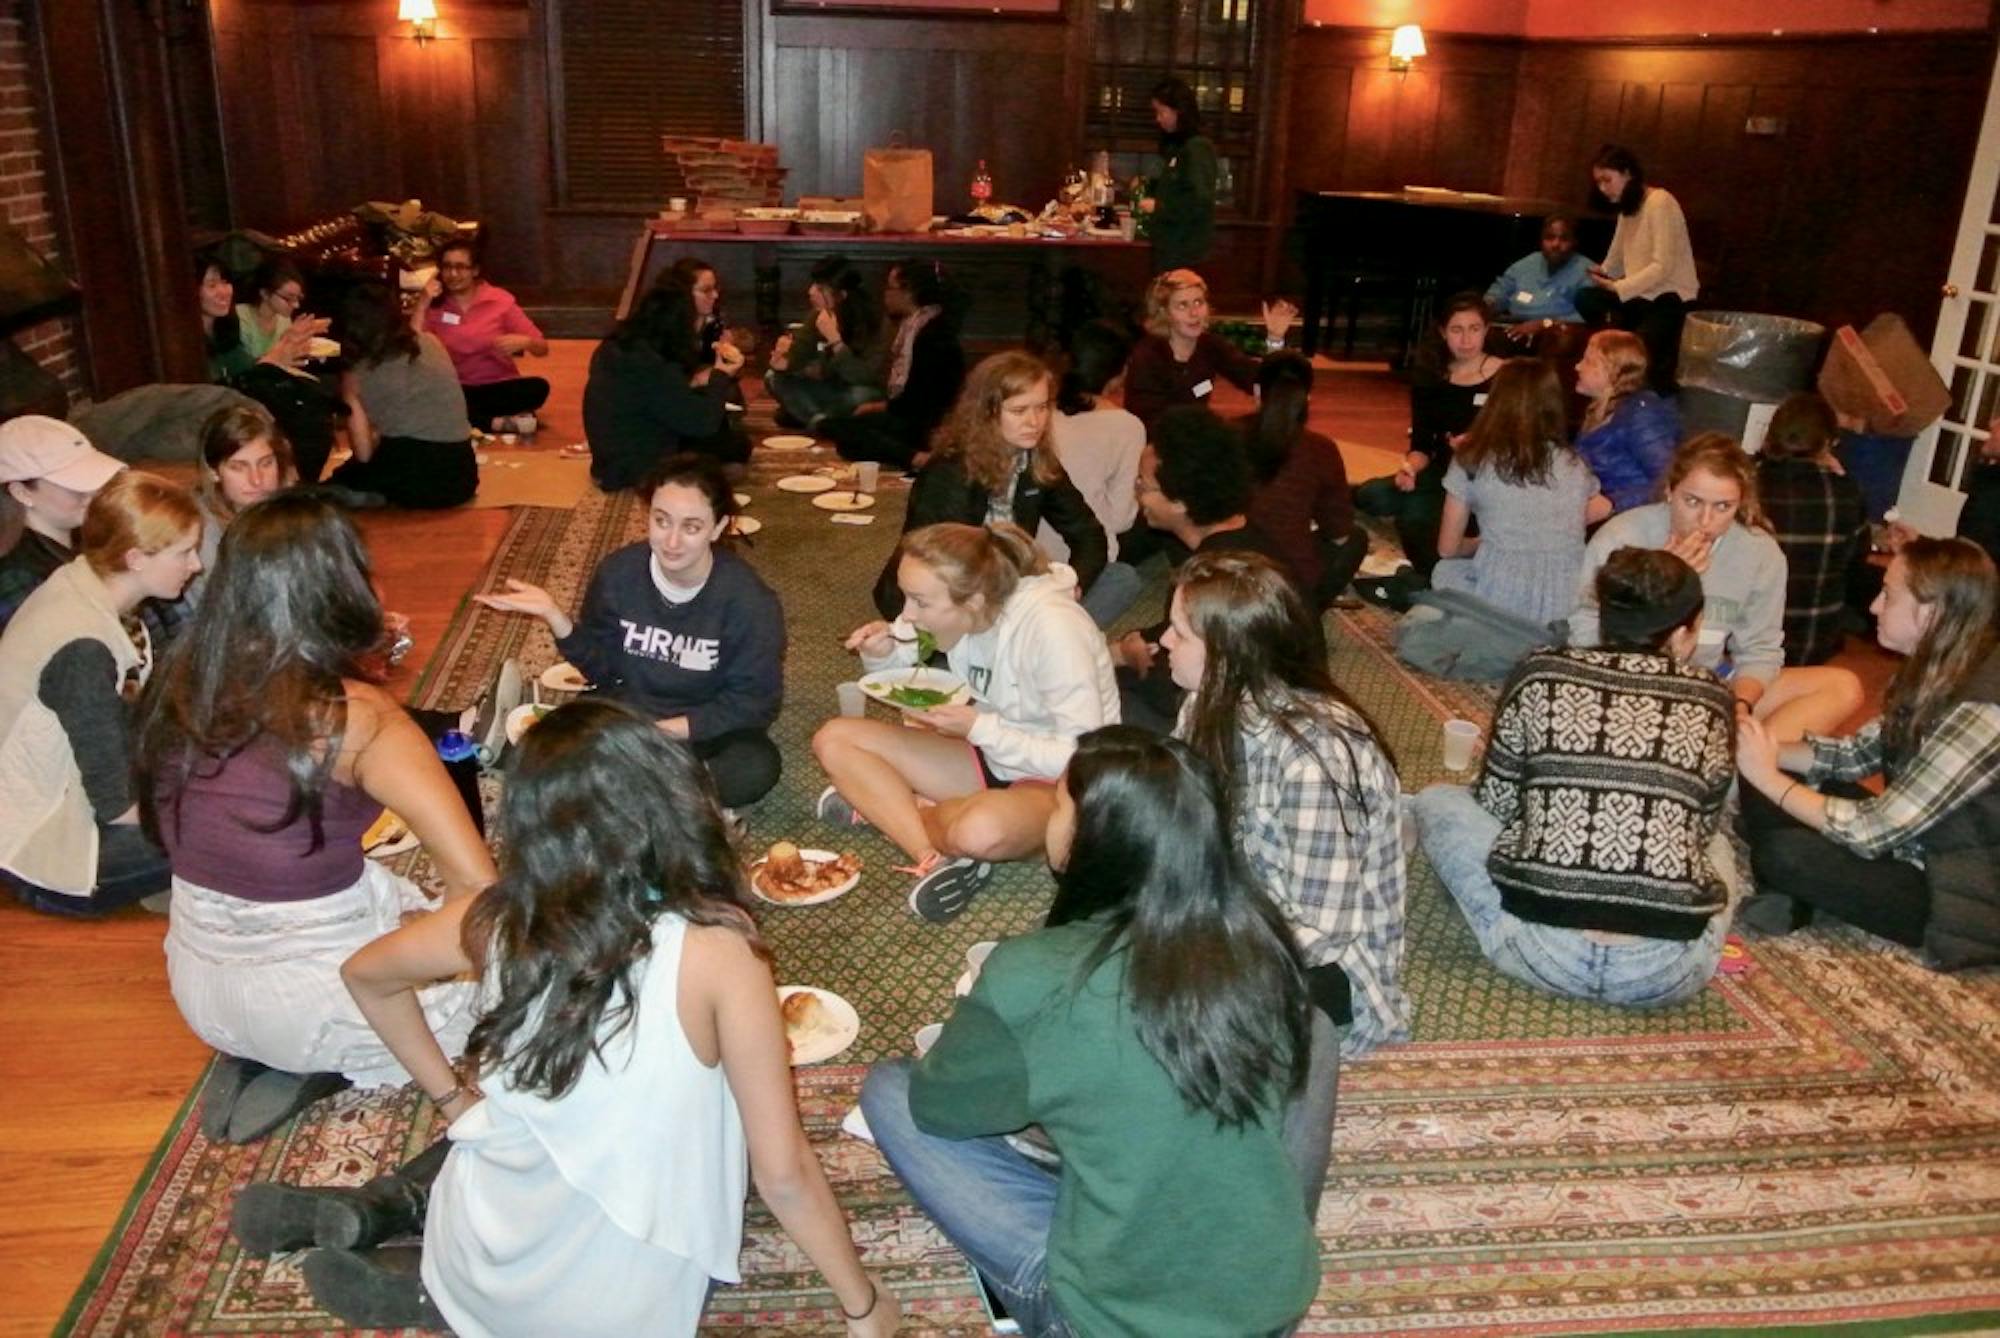 Women gathered in Casque and Gauntlet senior society on Monday night to celebrate community.